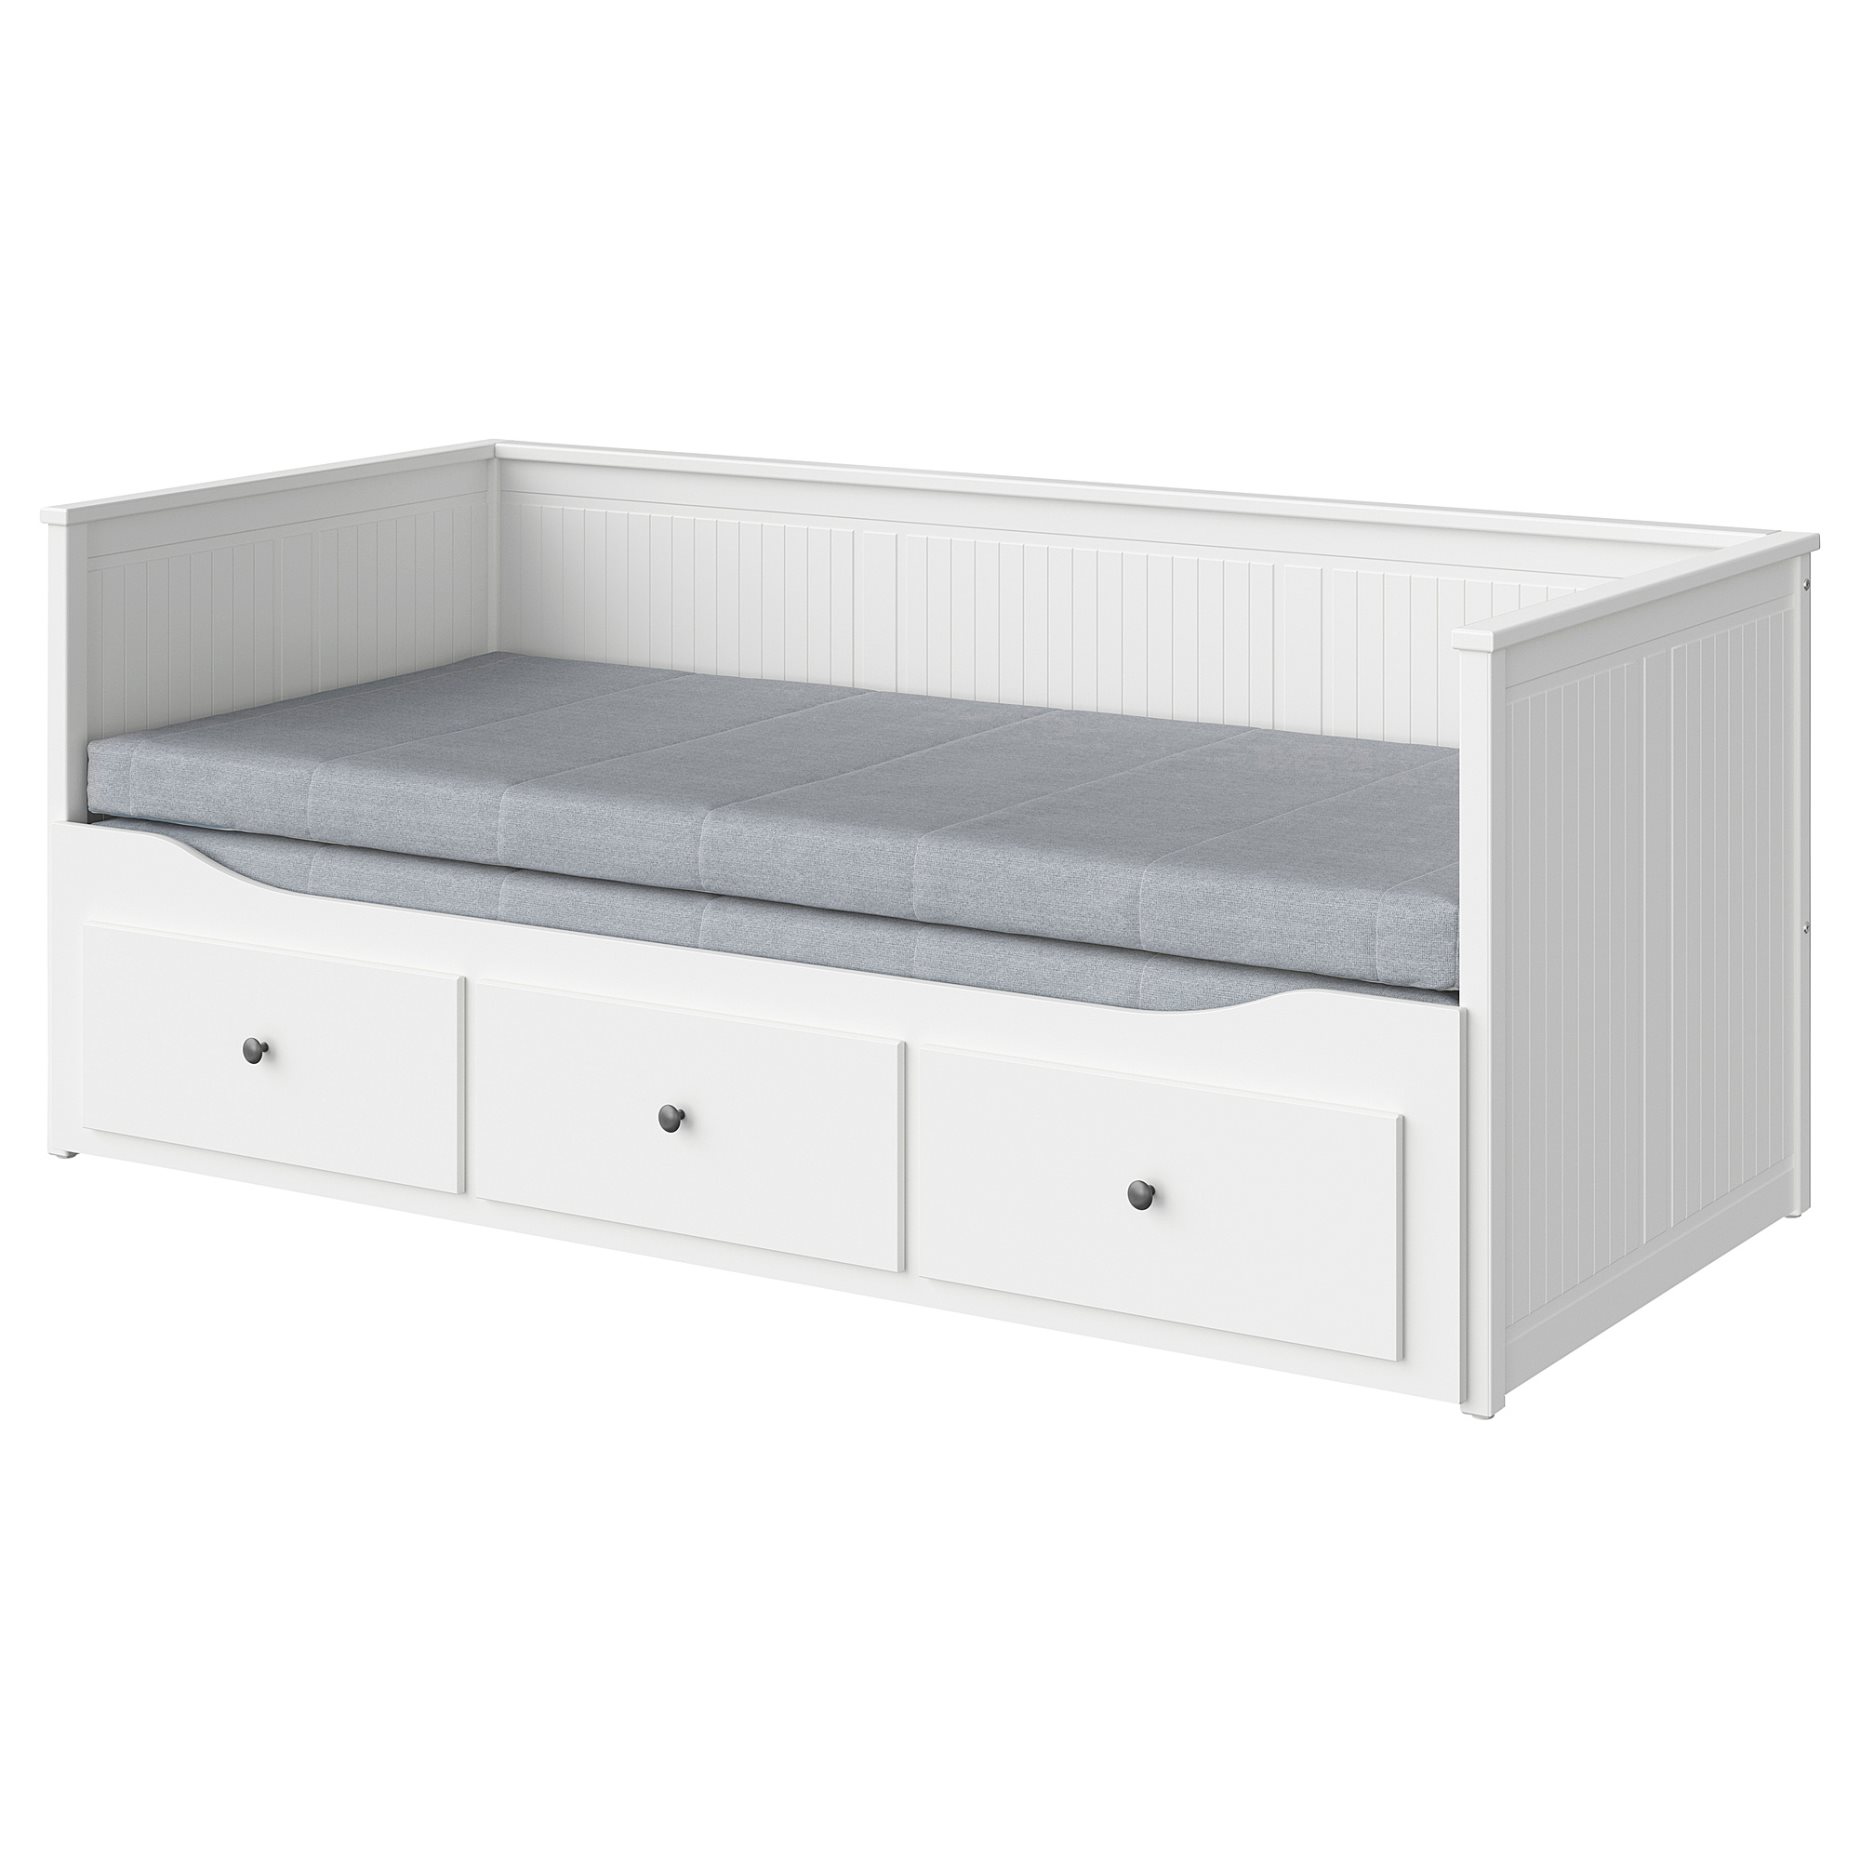 HEMNES, day-bed with 3 drawers/2 mattresses, 80x200 cm, 794.281.17